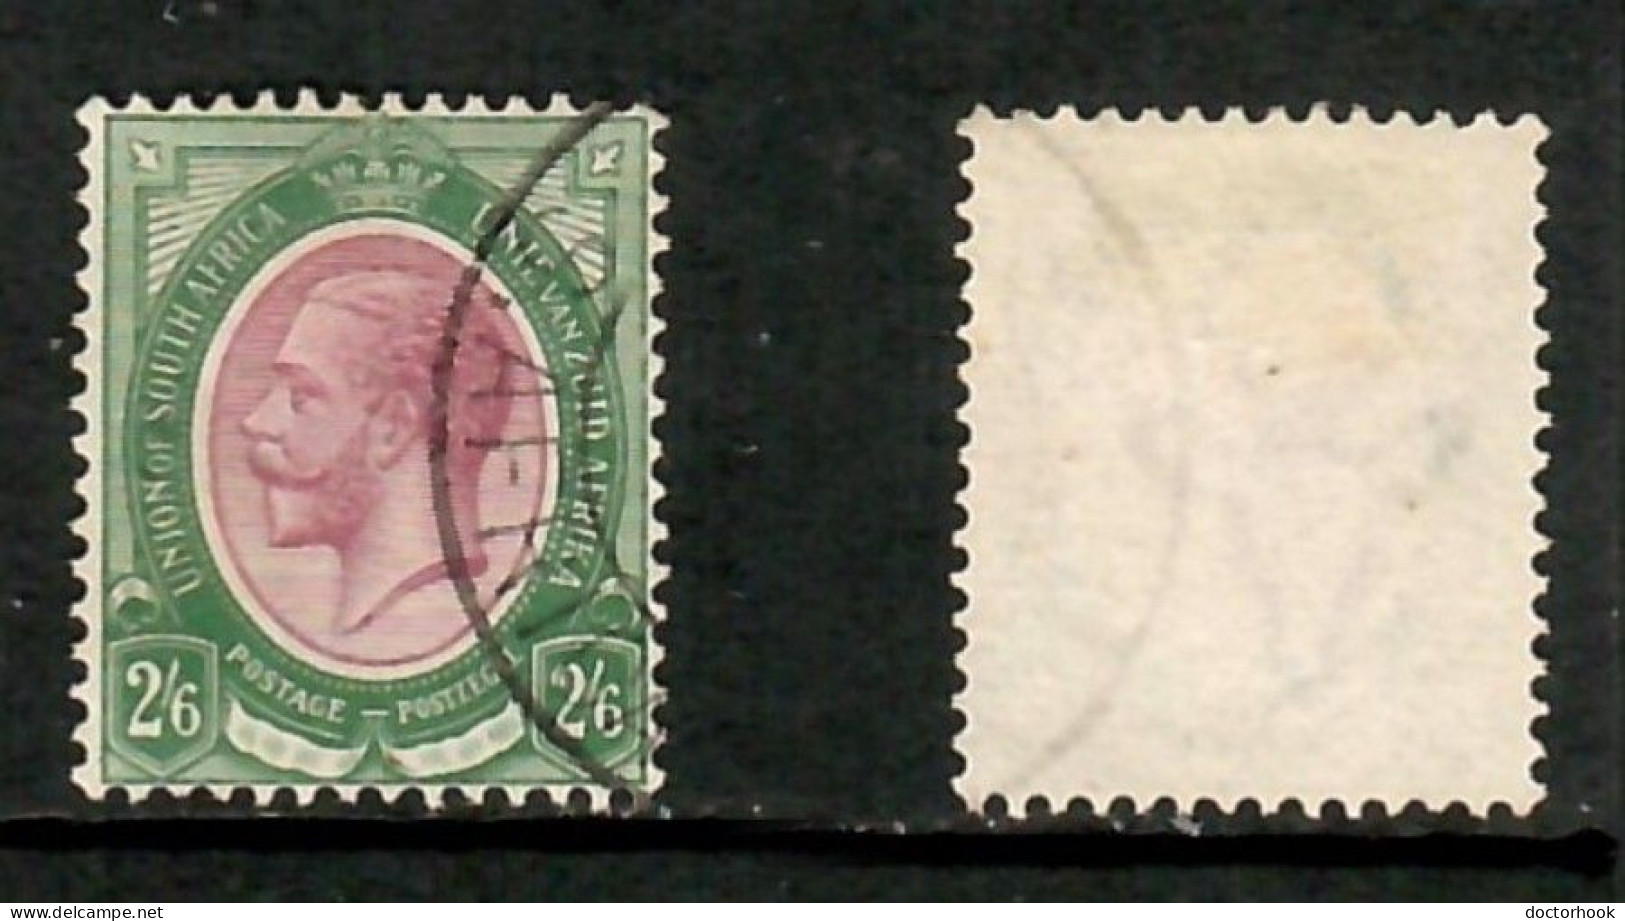 SOUTH AFRICA    Scott # 13 USED (CONDITION PER SCAN) (Stamp Scan # 1044-23) - Usados